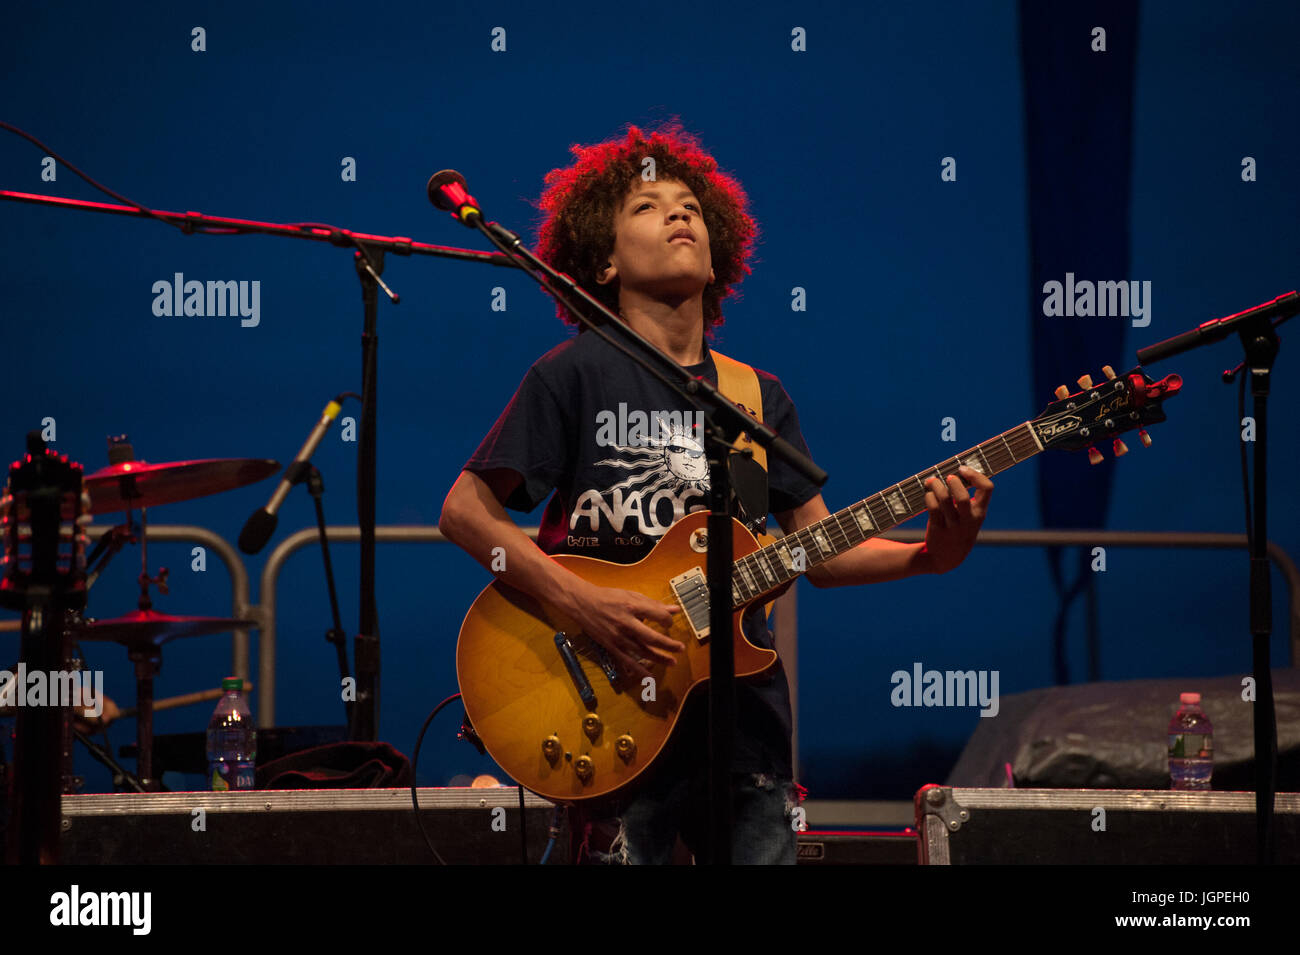 Brandon Niederauer “Taz,” a 14-year-old guitarist and vocalist, played with the Los Lobos band during a blues concert in Battery Park City, Manhattan. Stock Photo